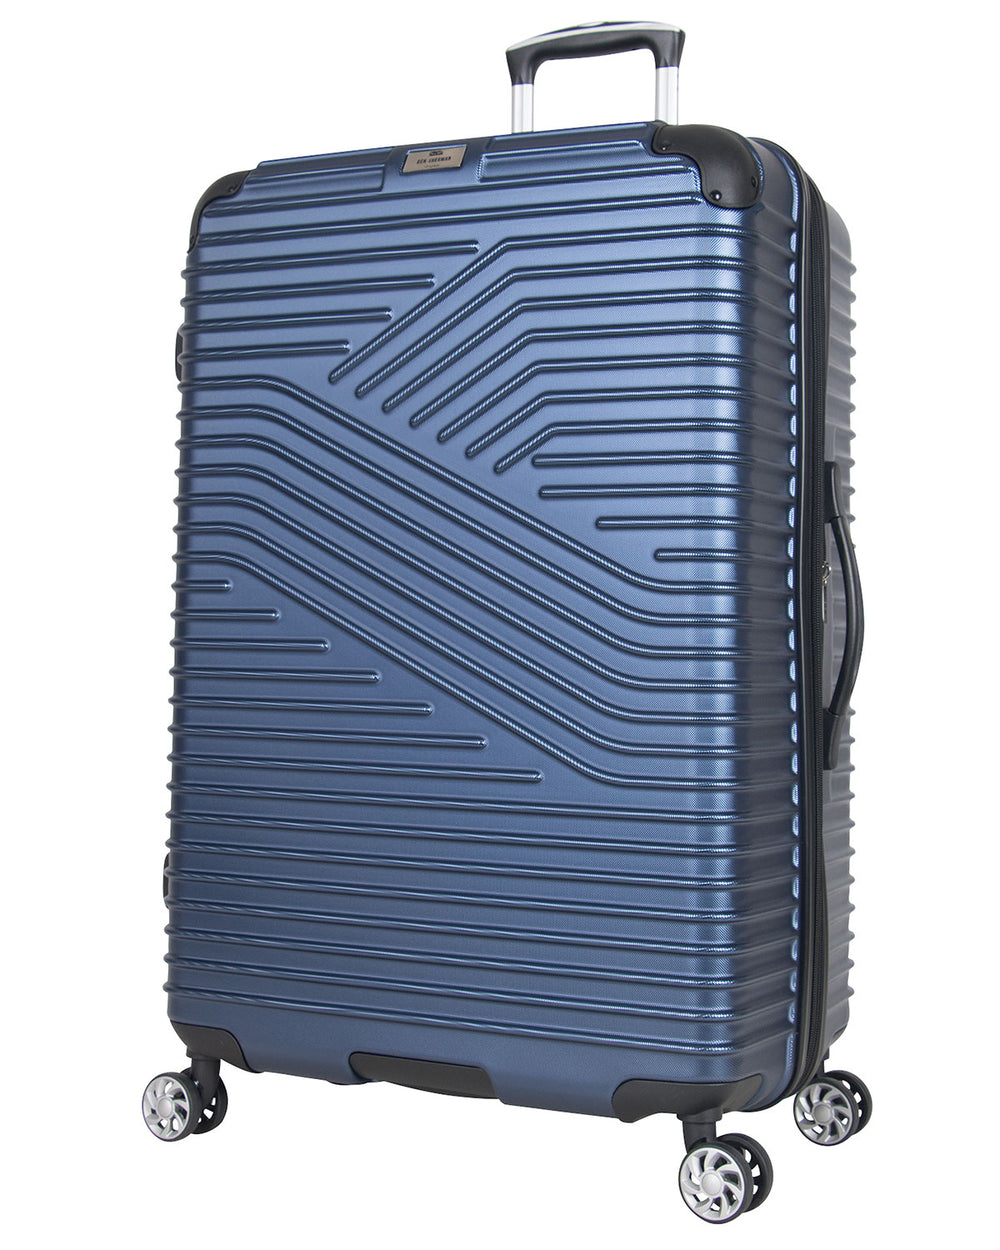 Upright Checked Luggage 28